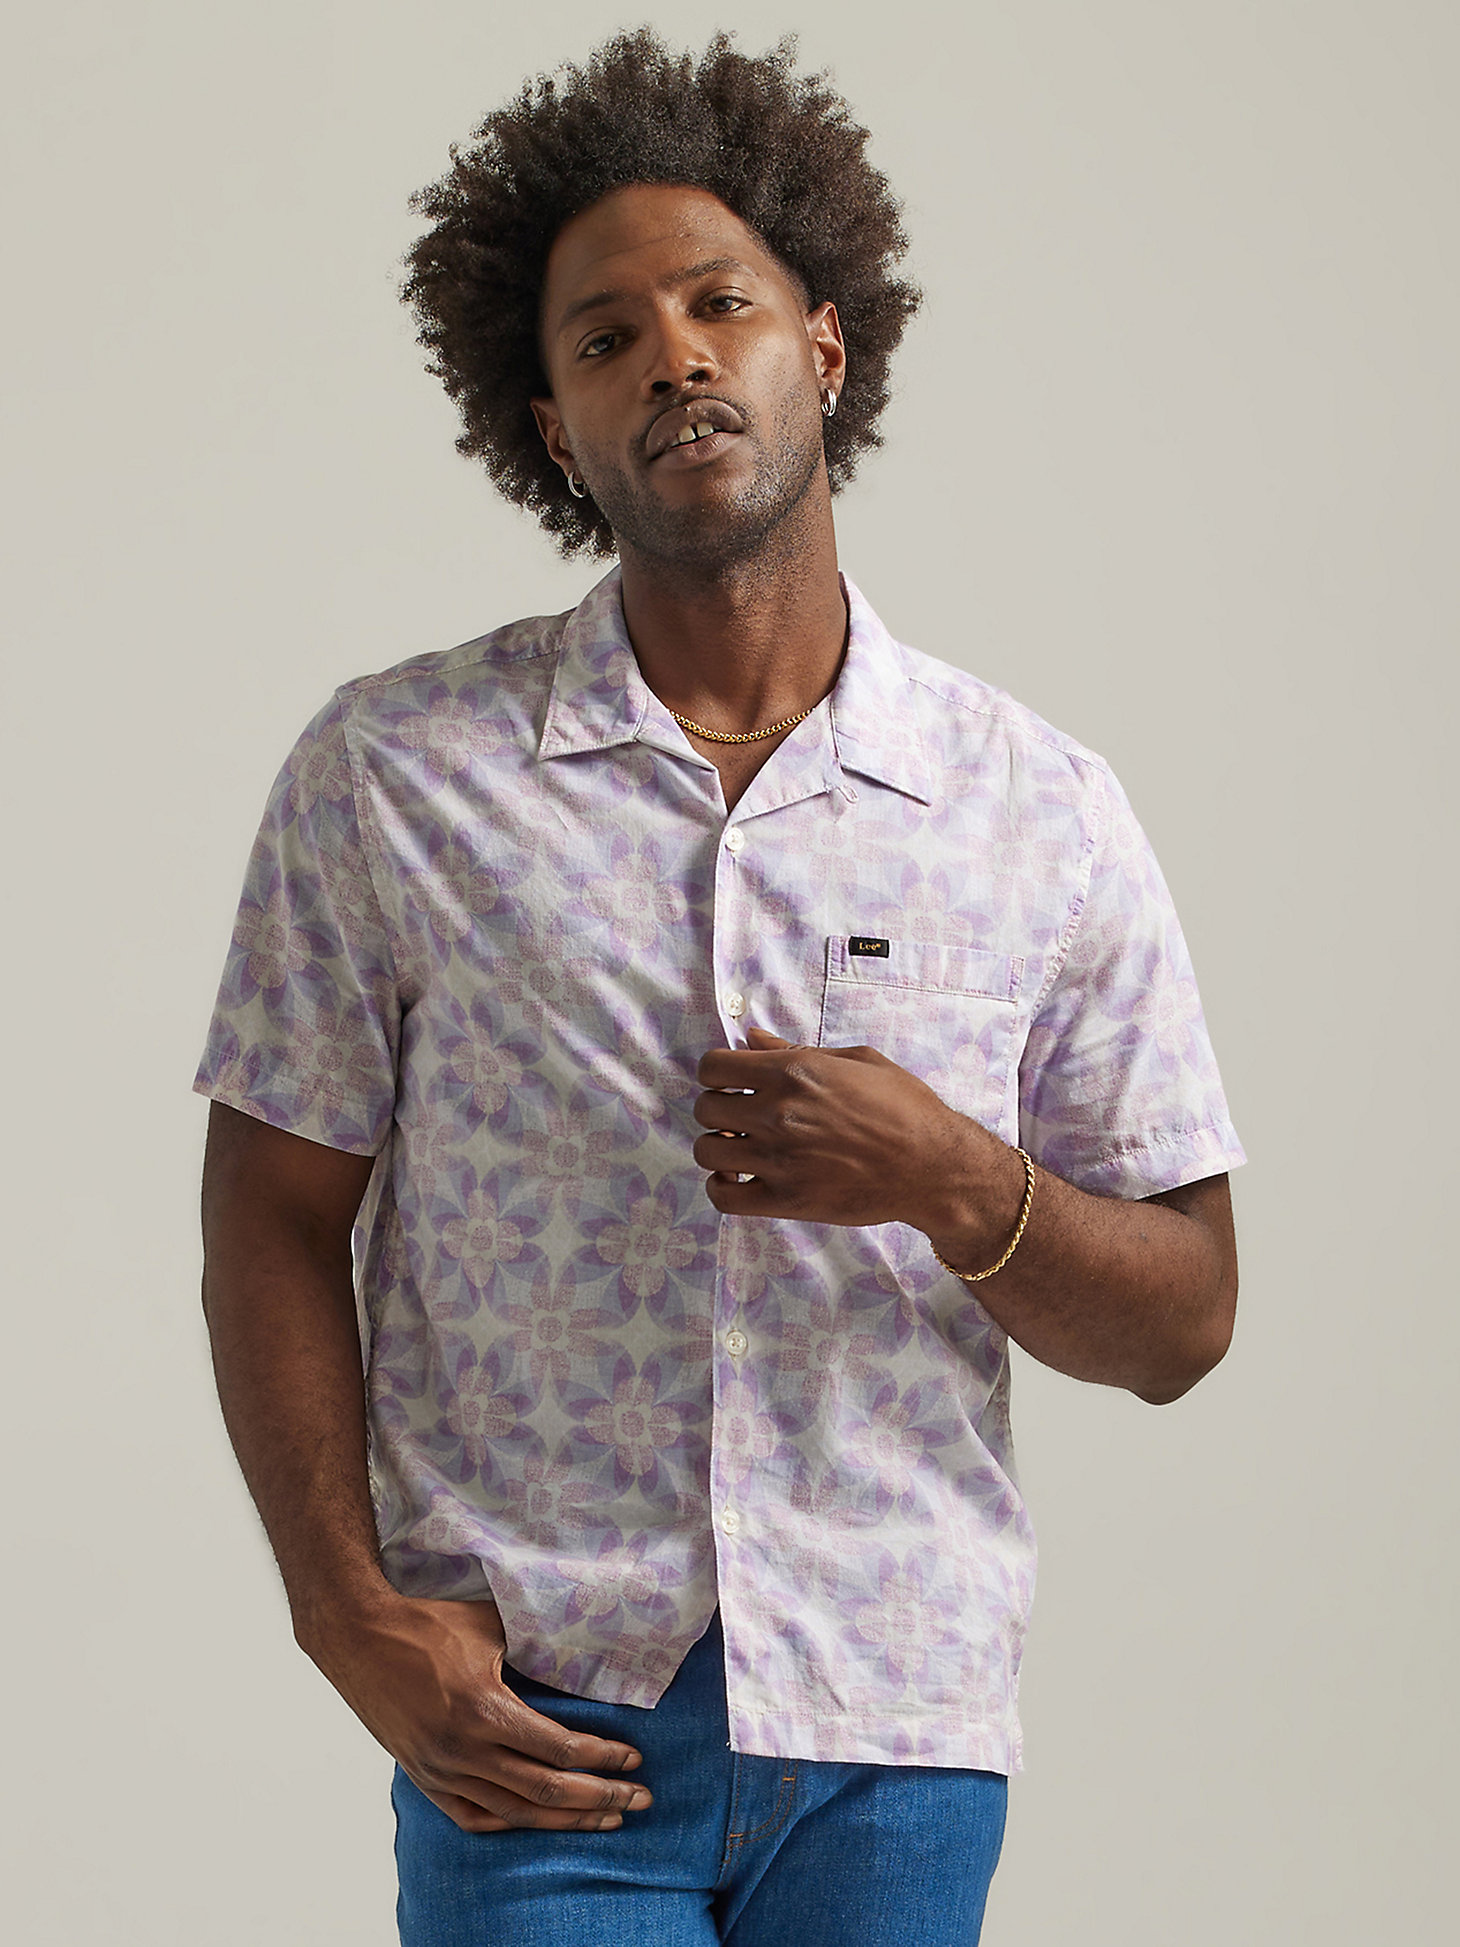 Men's Relaxed Fit Floral Resort Shirt in Foggy Gray alternative view 3